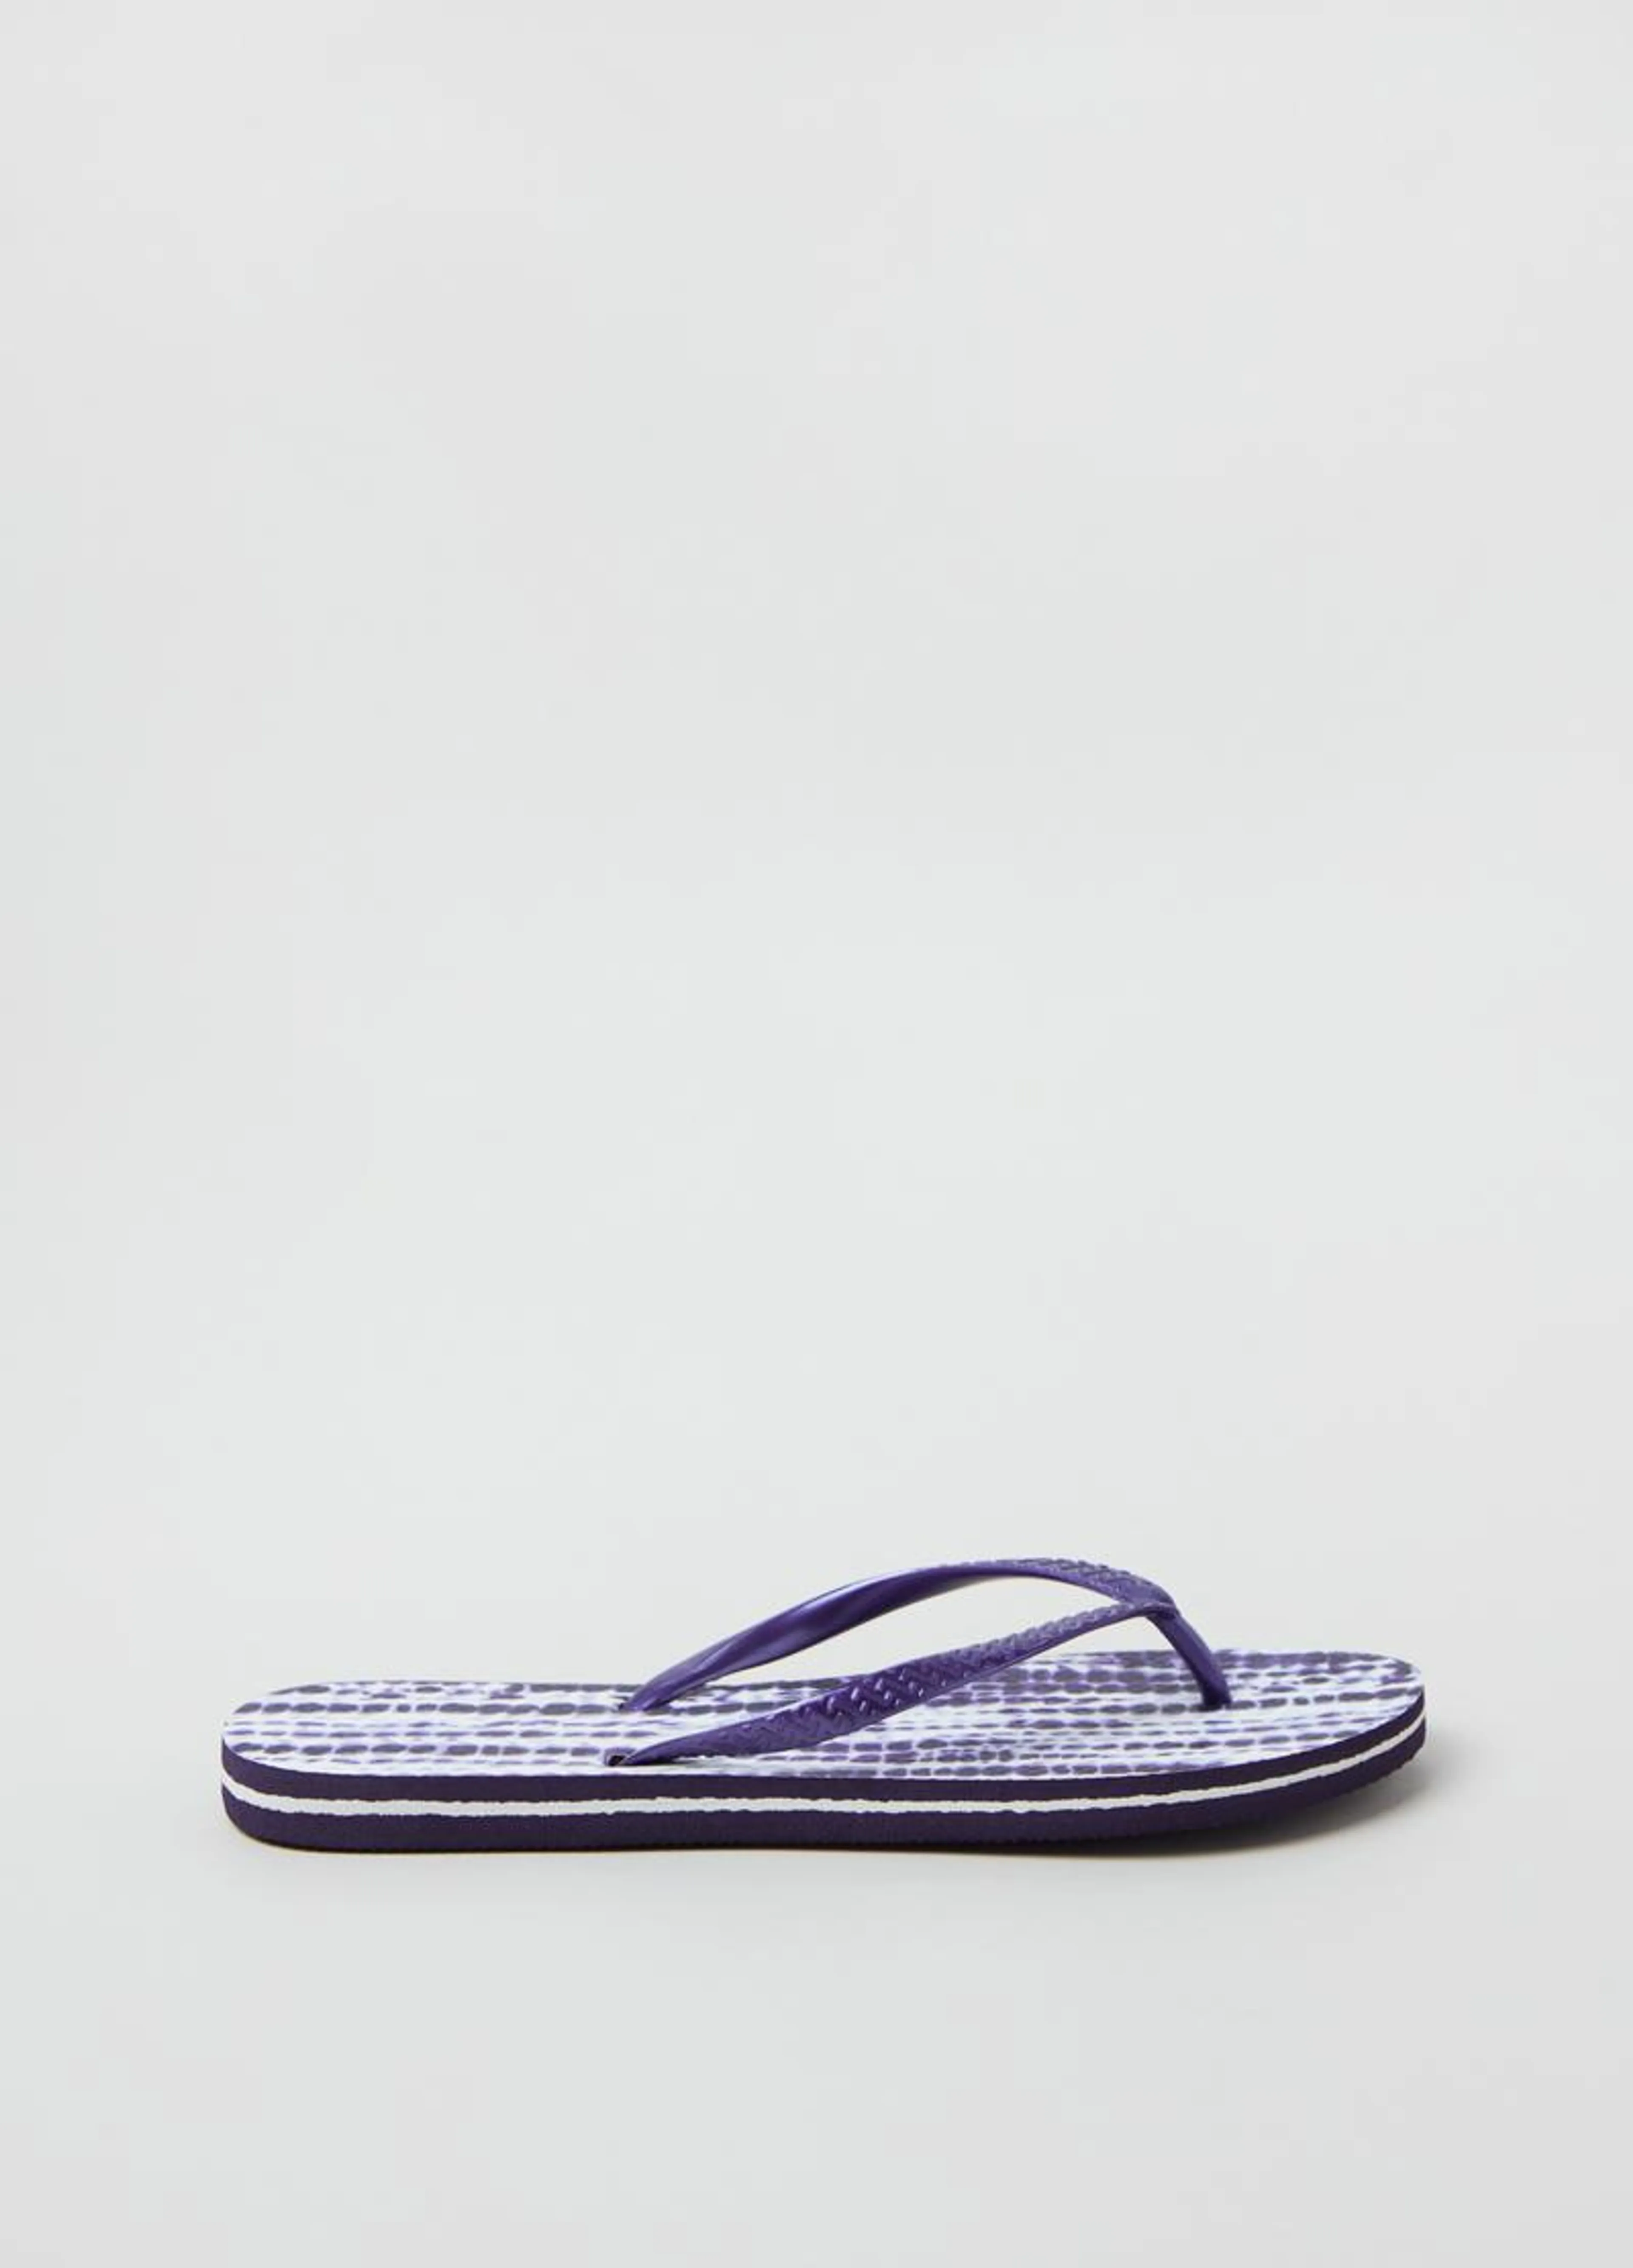 Thong sandals with tie-dye print